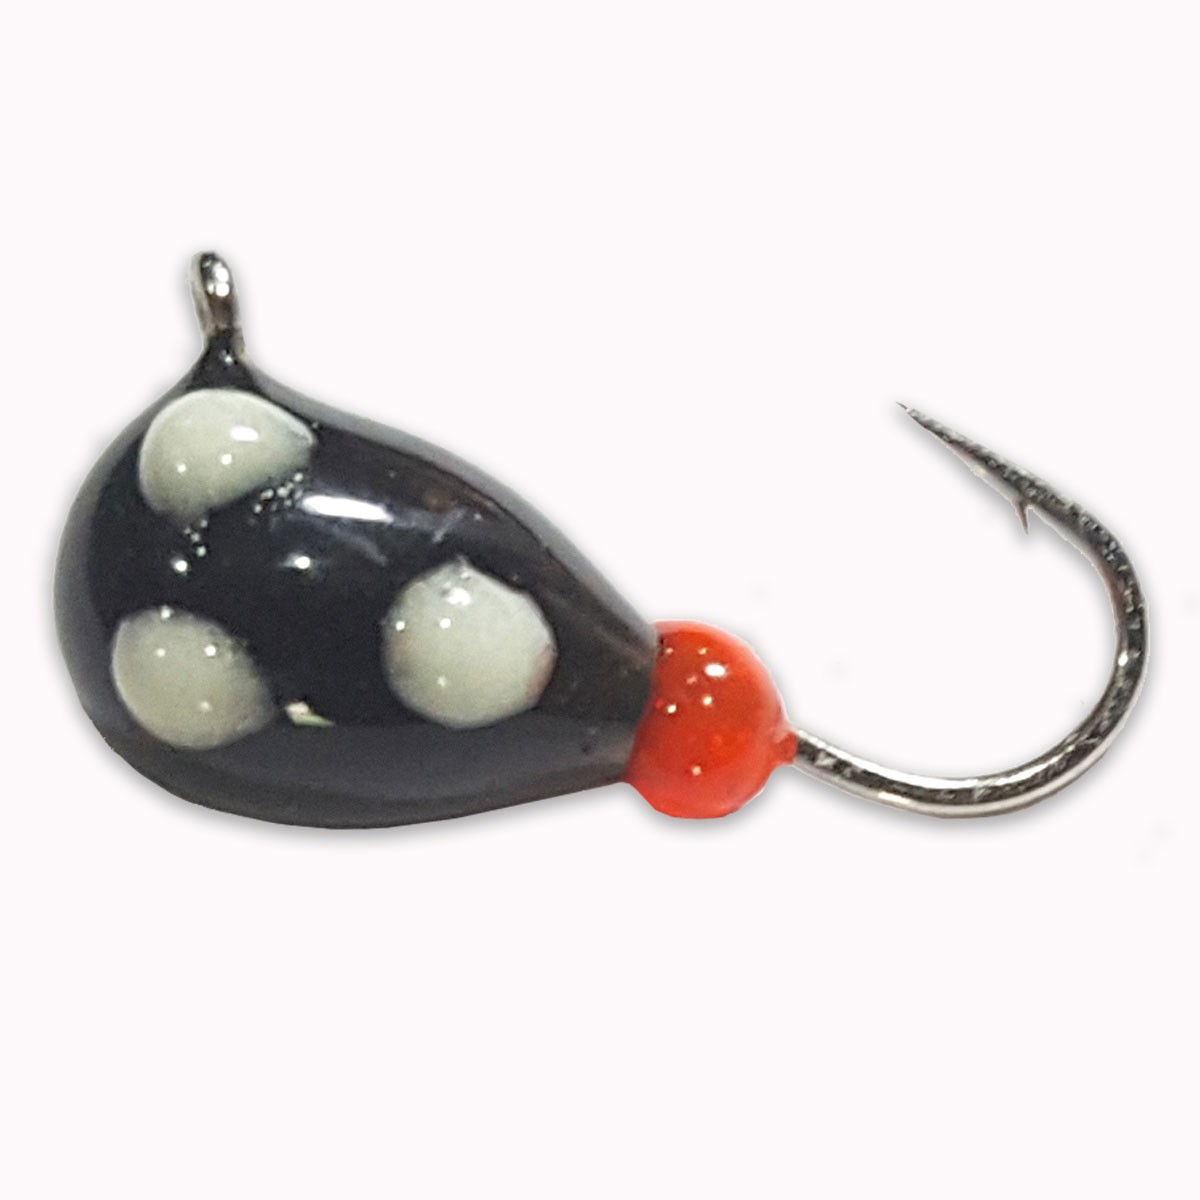 403, 4 each Tungsten Ice Fishing Tear Drop Jig, 1 Gram, #14 Hook, 4.0mm  size, Black Glow SpotUV Paint & Glow PaintUnigue Wax Worm Shape Allows For  More Tungsten Weight, To Get